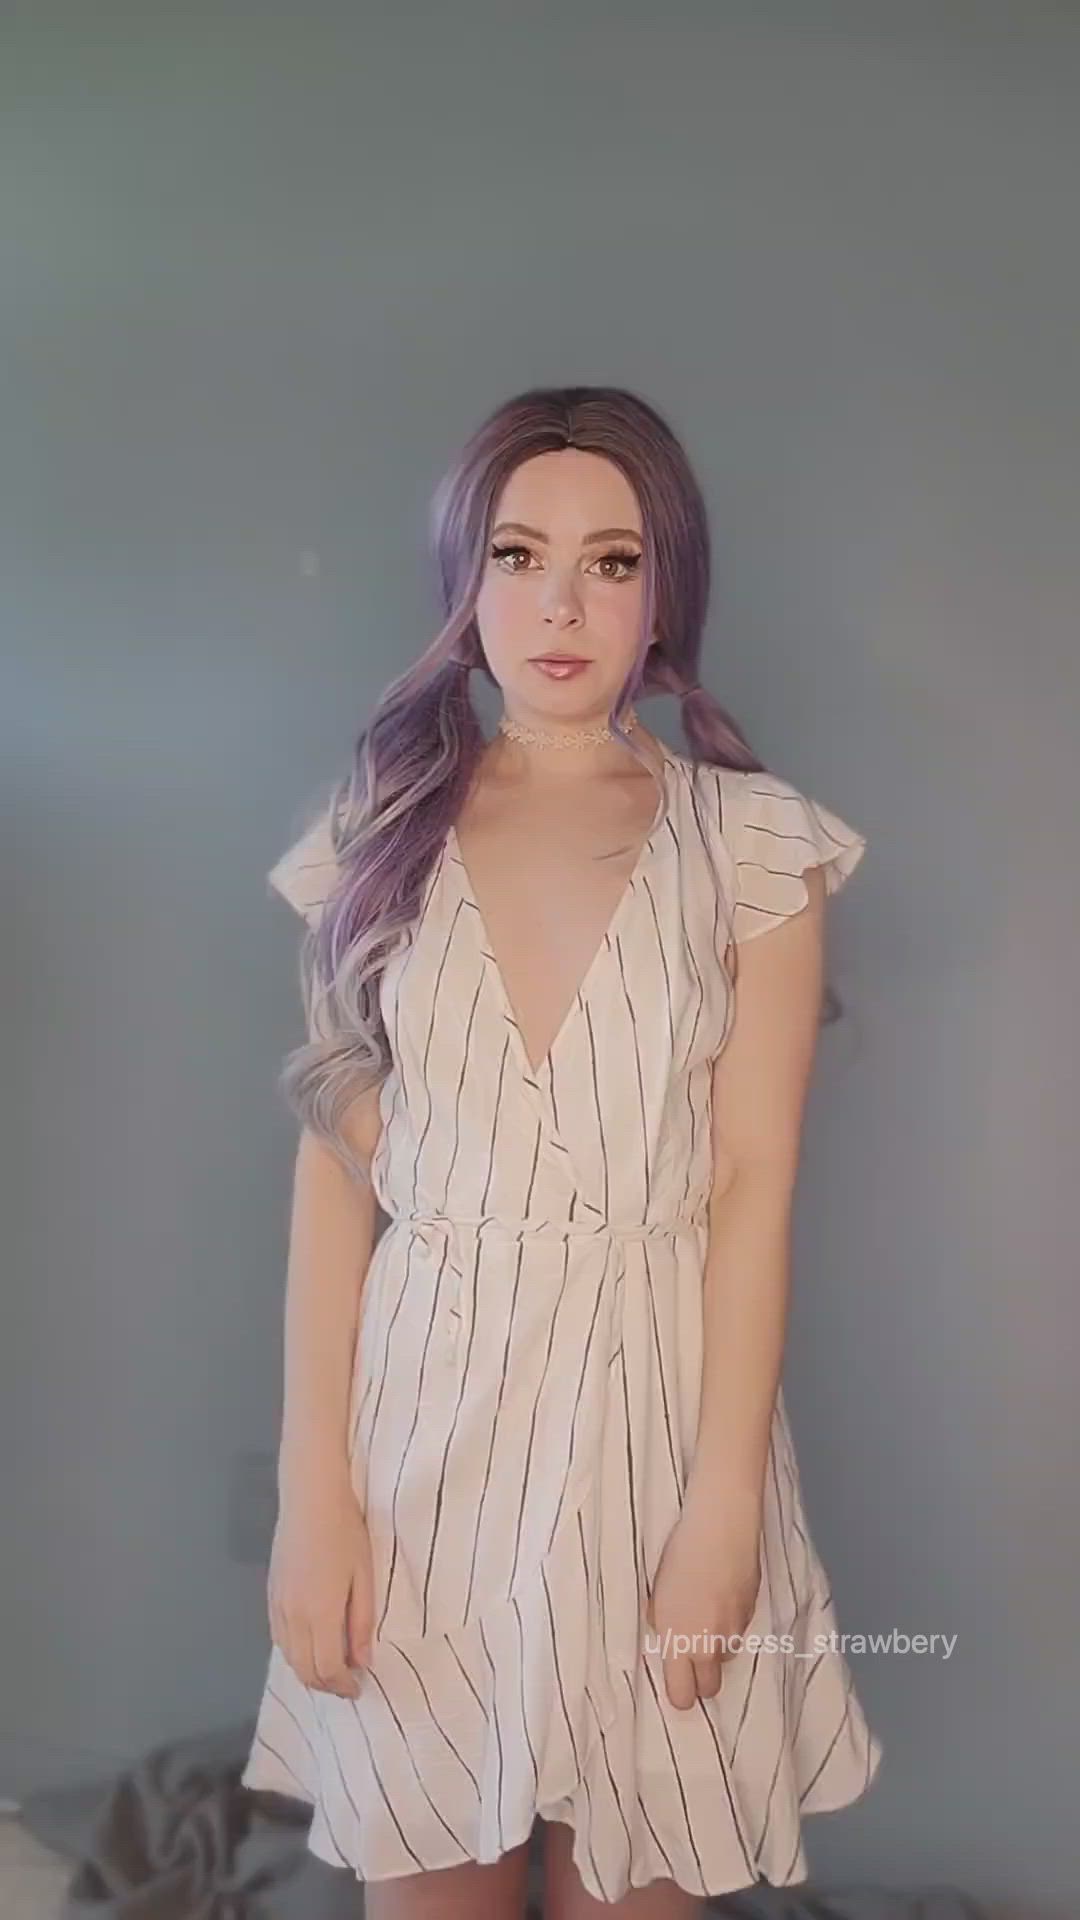 Teen porn video with onlyfans model princess_strawbery <strong>@princess_strawbery</strong>